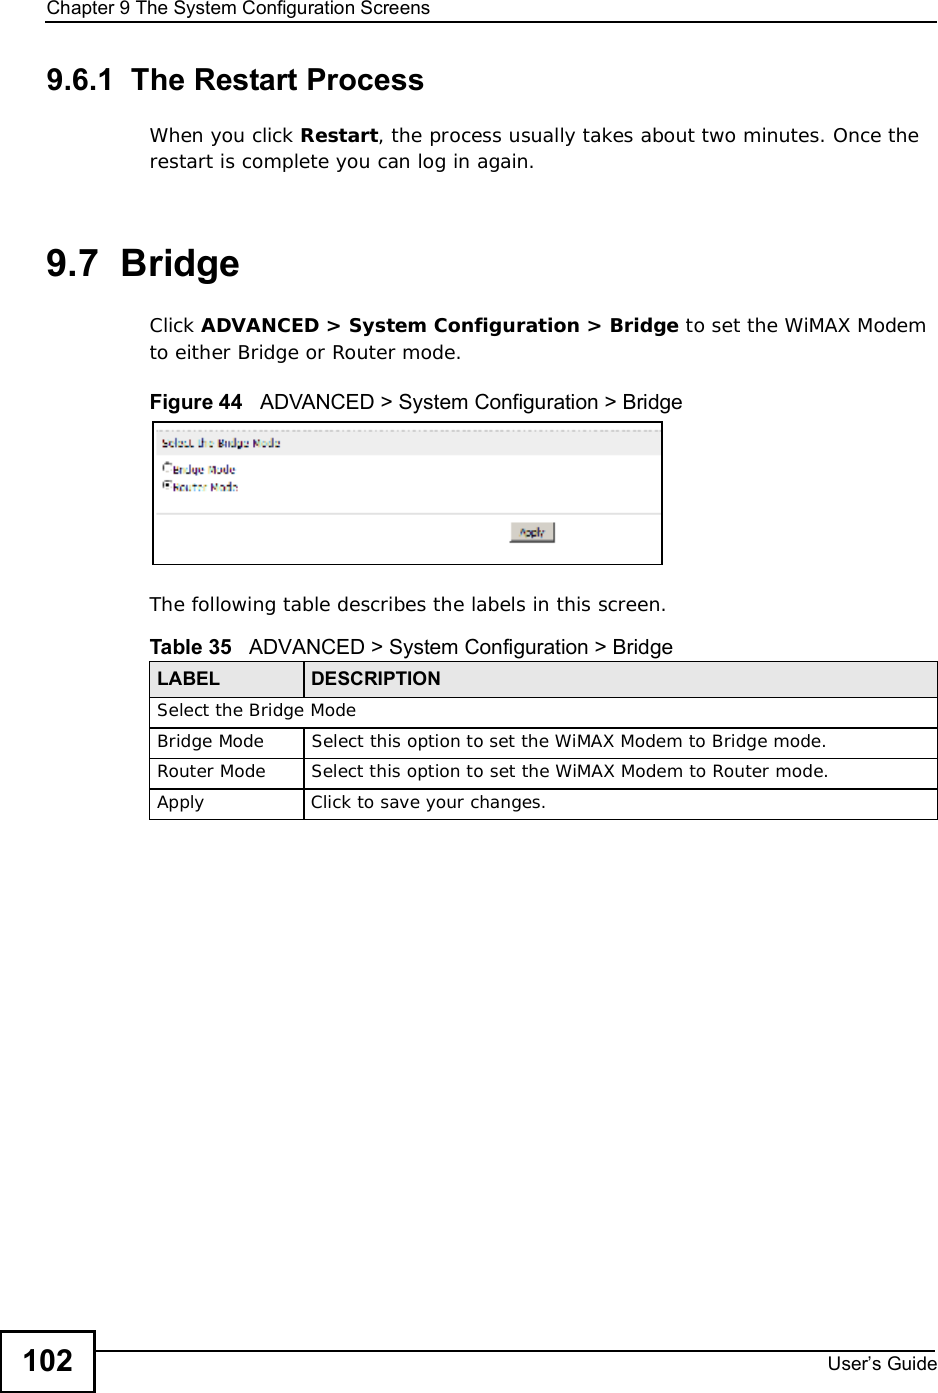 Chapter 9The System Configuration ScreensUser s Guide1029.6.1  The Restart Process When you click Restart, the process usually takes about two minutes. Once the restart is complete you can log in again.9.7  BridgeClick ADVANCED &gt; System Configuration &gt; Bridge to set the WiMAX Modem to either Bridge or Router mode.Figure 44   ADVANCED &gt; System Configuration &gt; BridgeThe following table describes the labels in this screen.    Table 35   ADVANCED &gt; System Configuration &gt; BridgeLABEL DESCRIPTIONSelect the Bridge ModeBridge ModeSelect this option to set the WiMAX Modem to Bridge mode.Router ModeSelect this option to set the WiMAX Modem to Router mode.ApplyClick to save your changes.